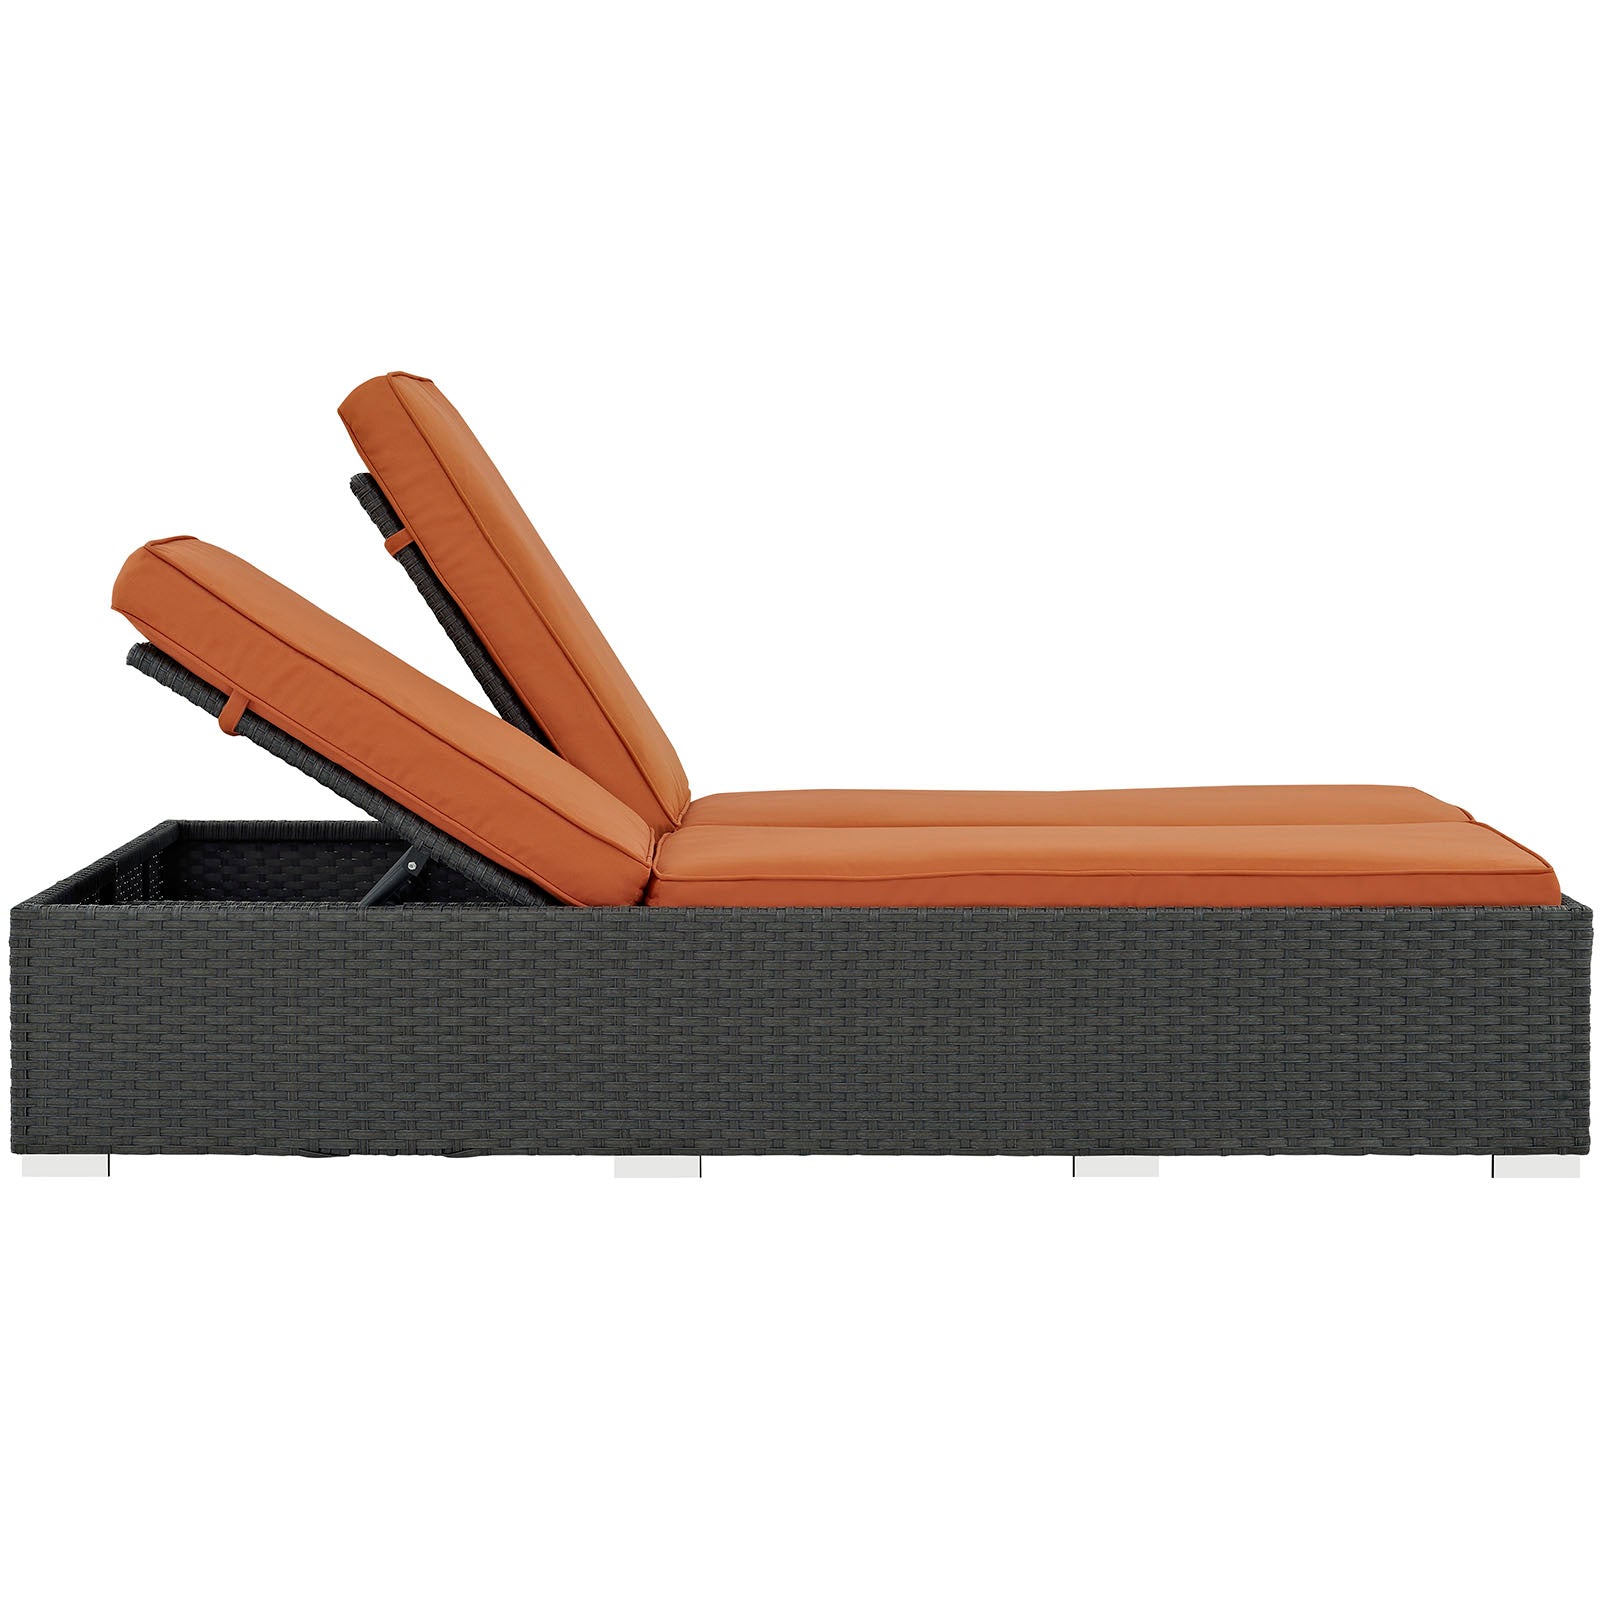 Sojourn Outdoor Patio Sunbrella® Double Chaise